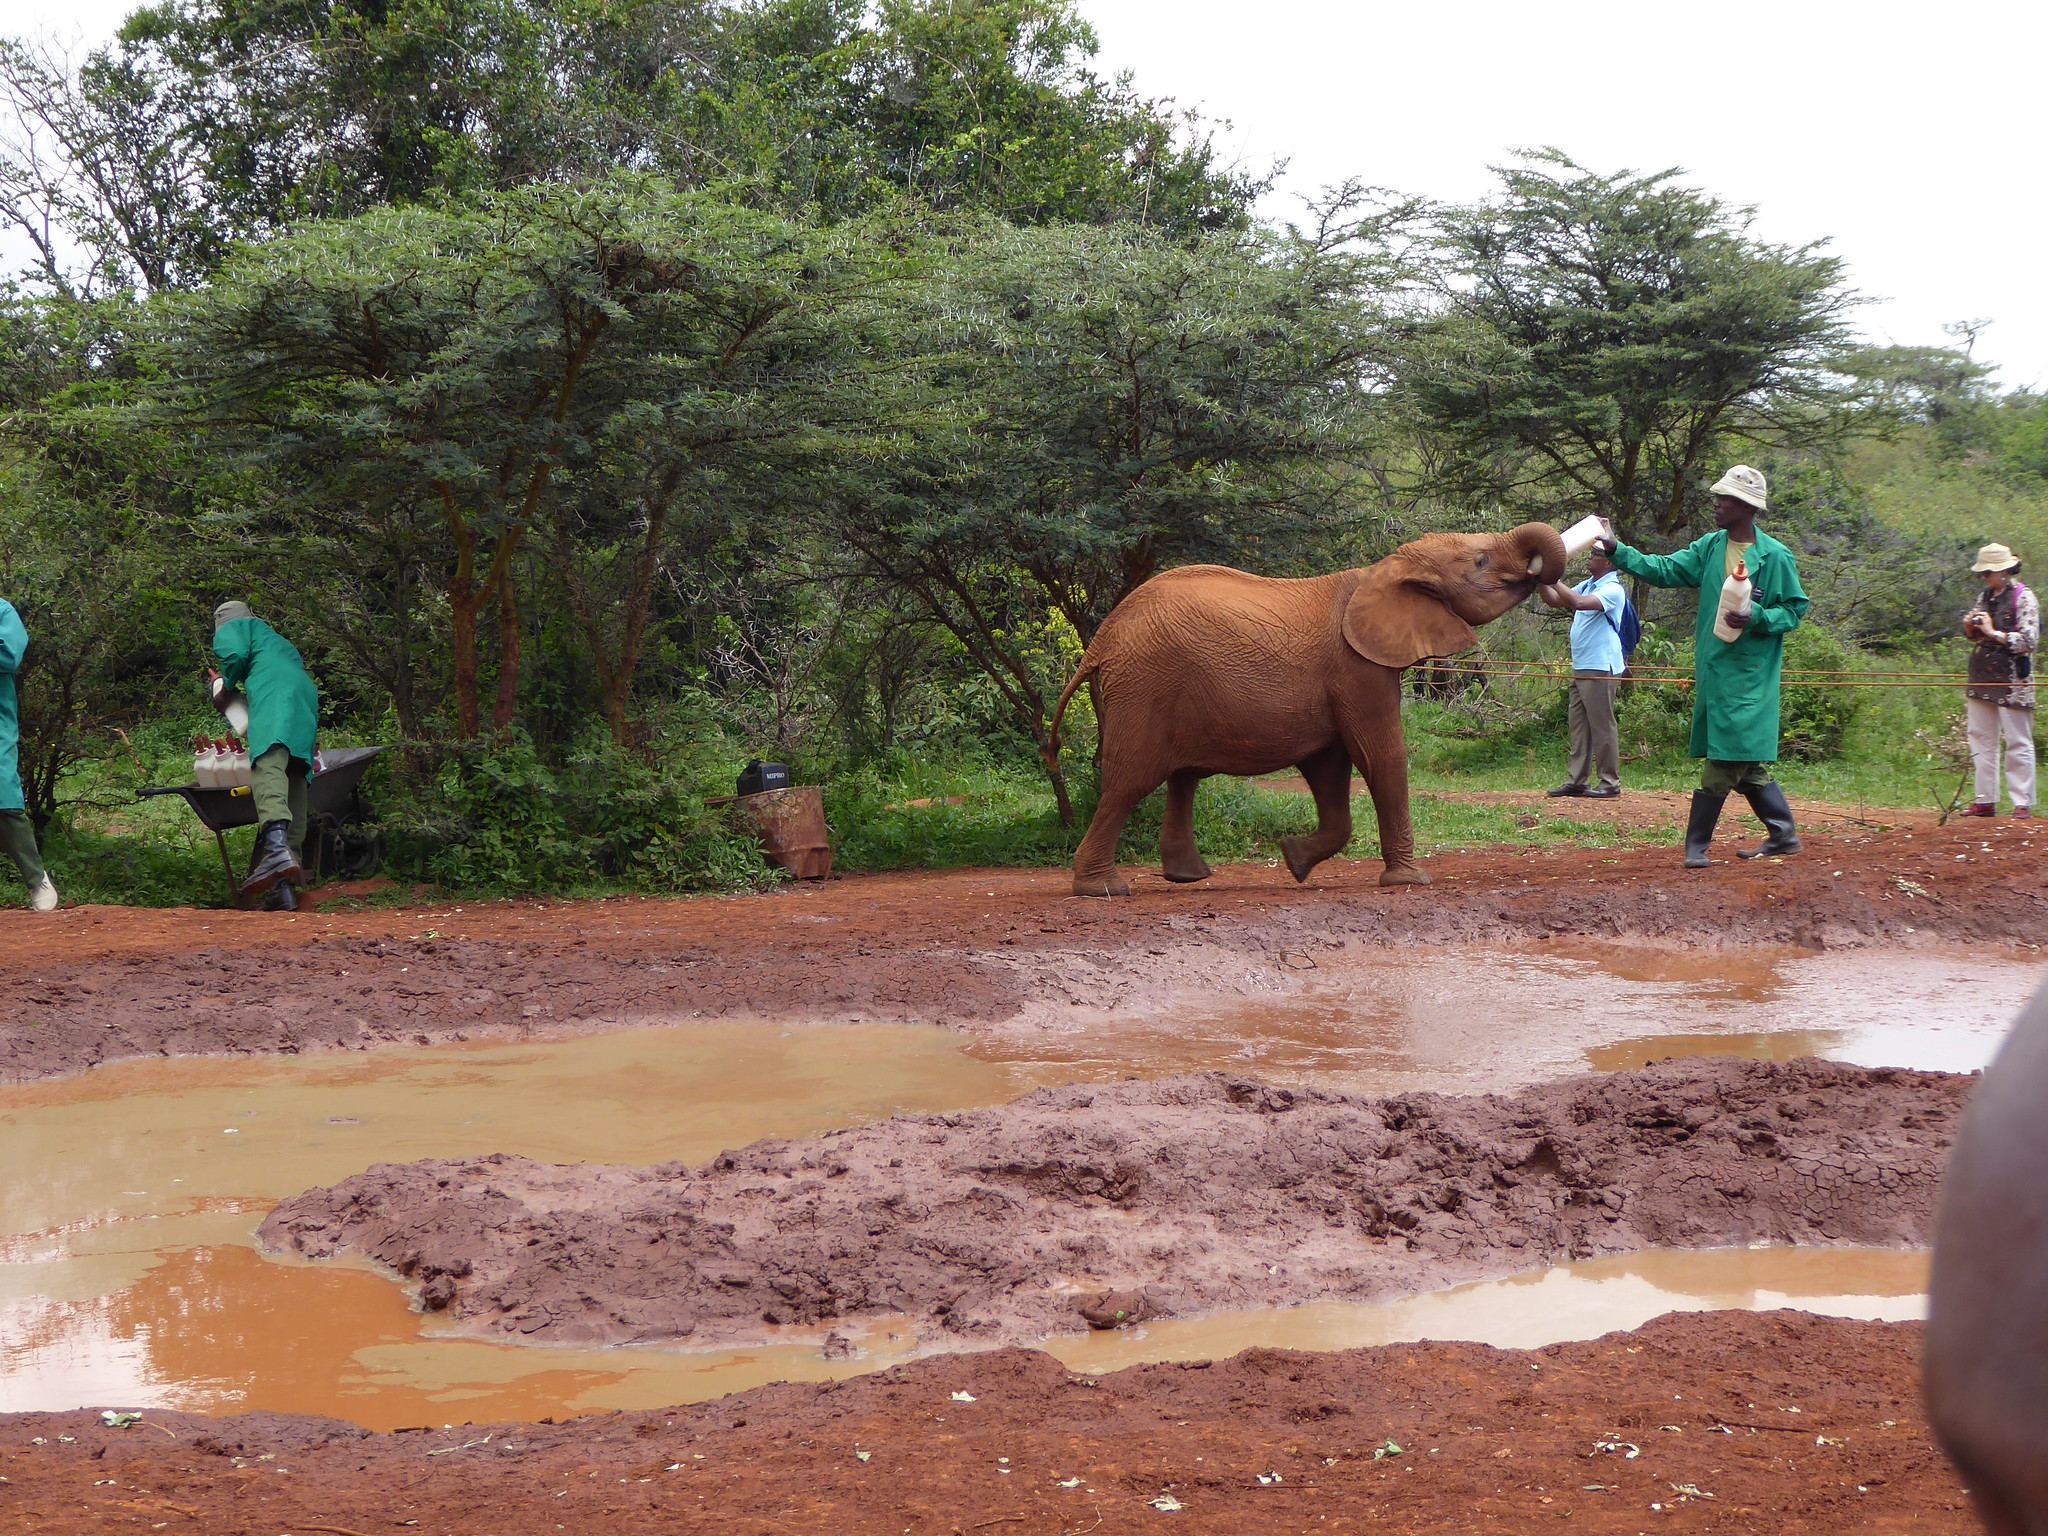 Baby elephant drinks milk replacement formula at Sheldrick Wildlife Trust's Orphans' Project while visitors watch